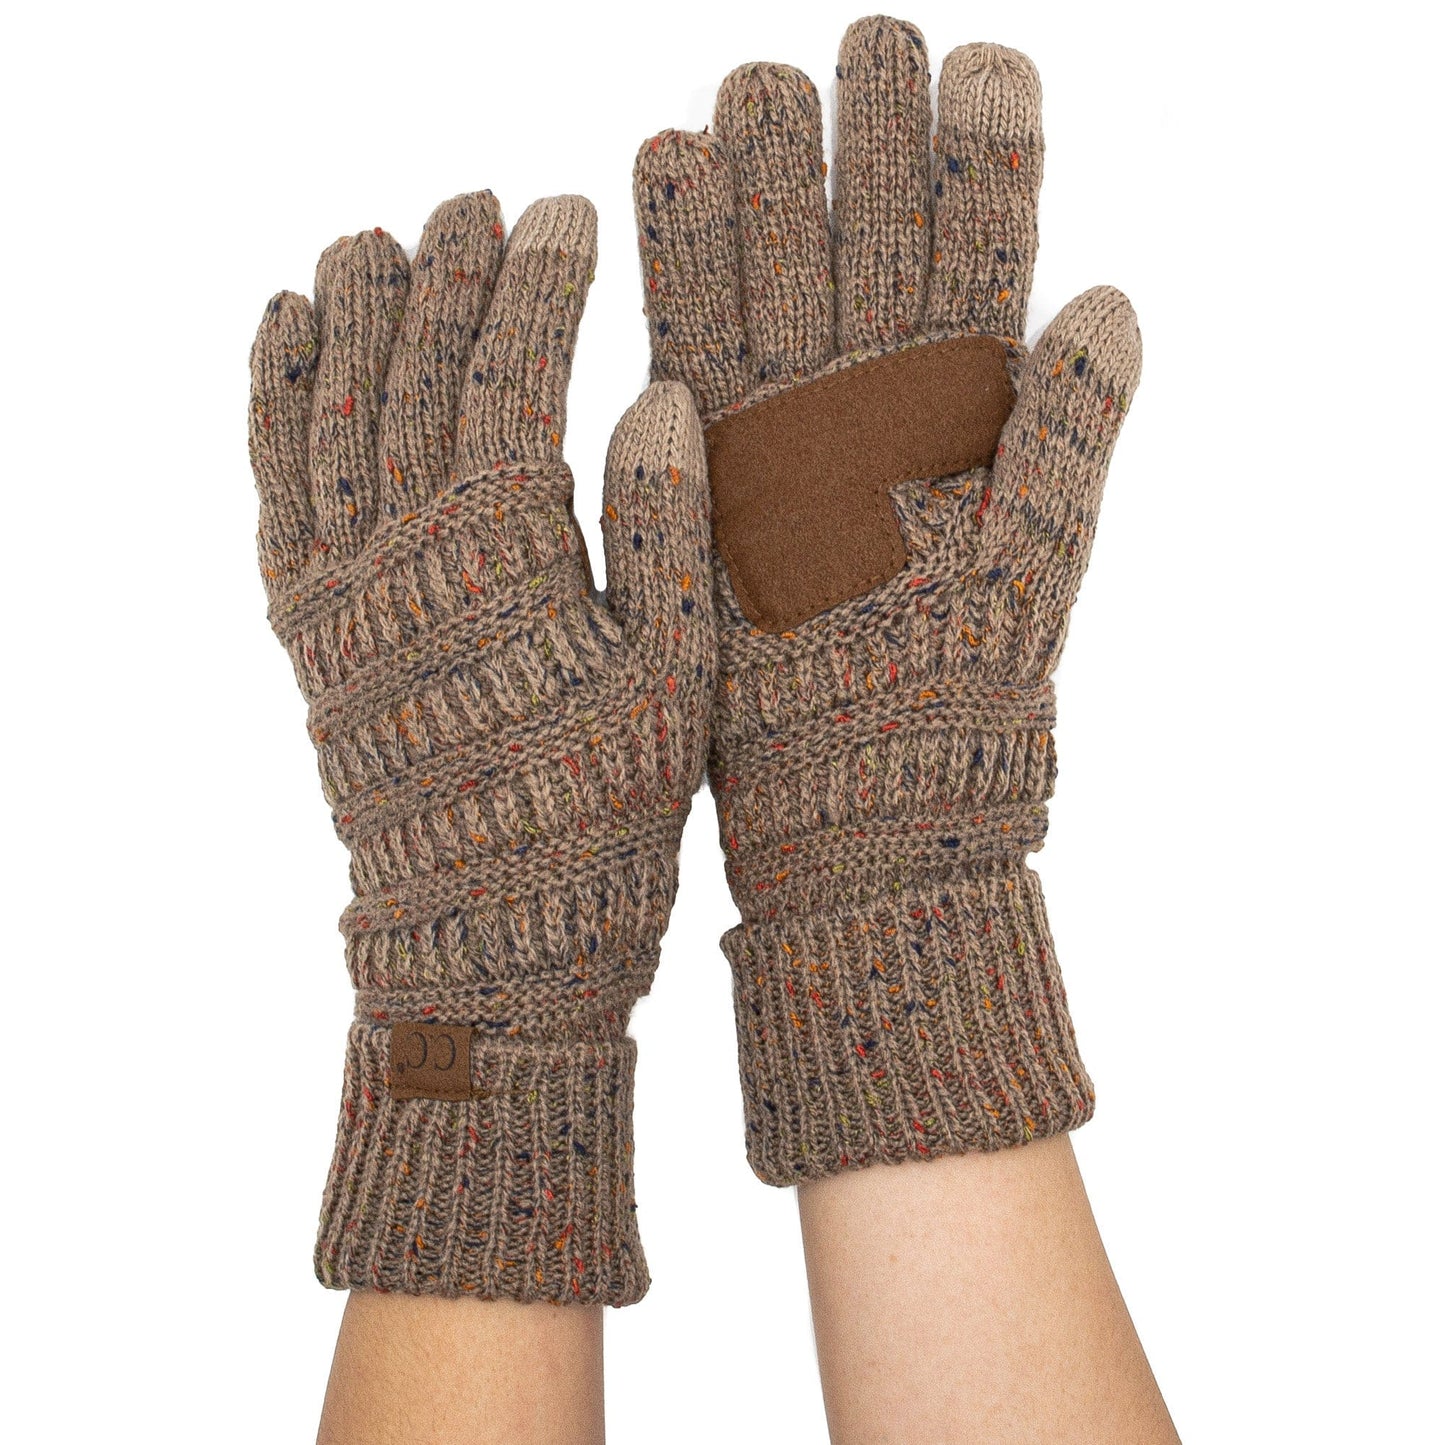 C.C G33 - Unisex Cable Knit Winter Warm Anti-Slip Touchscreen Confetti Texting Gloves